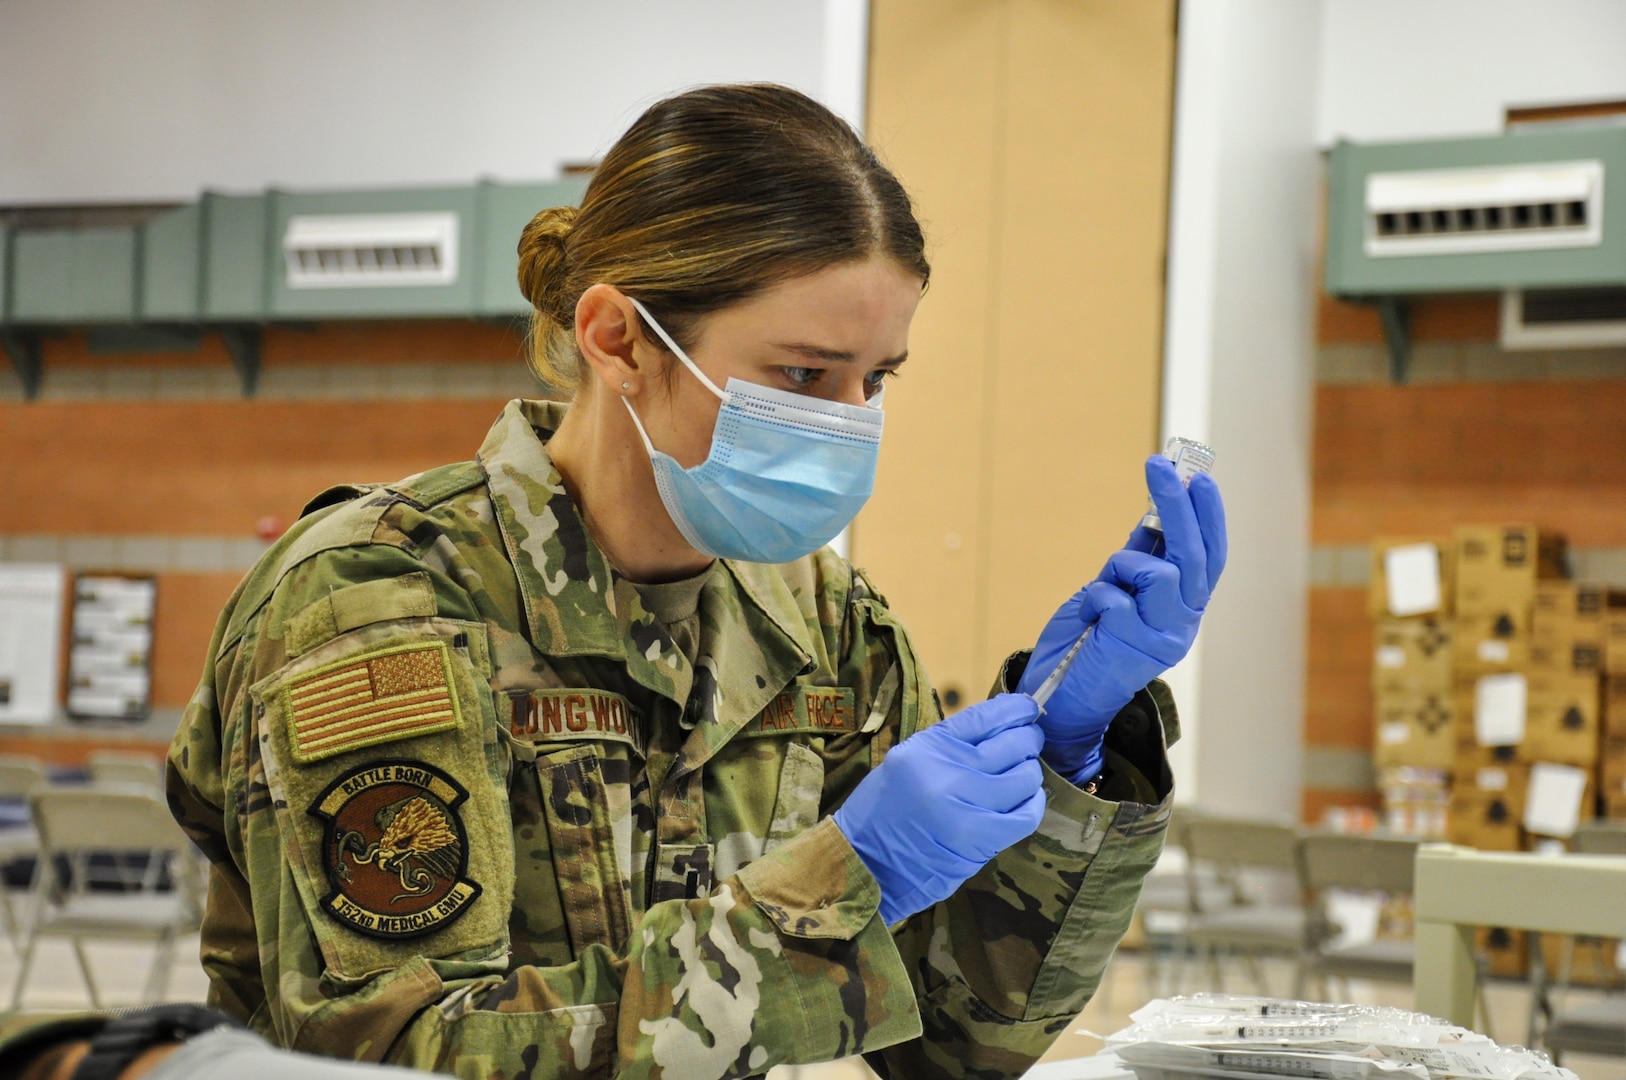 Nevada Air National Guard 1st Lt. Caleena Longworth with Joint Task Force 17 prepares a syringe with the Moderna vaccine at the Las Vegas Readiness Center, Wednesday, Jan. 27, 2021 in Las Vegas, Nevada. Longworth has vaccinated 4,500 people.